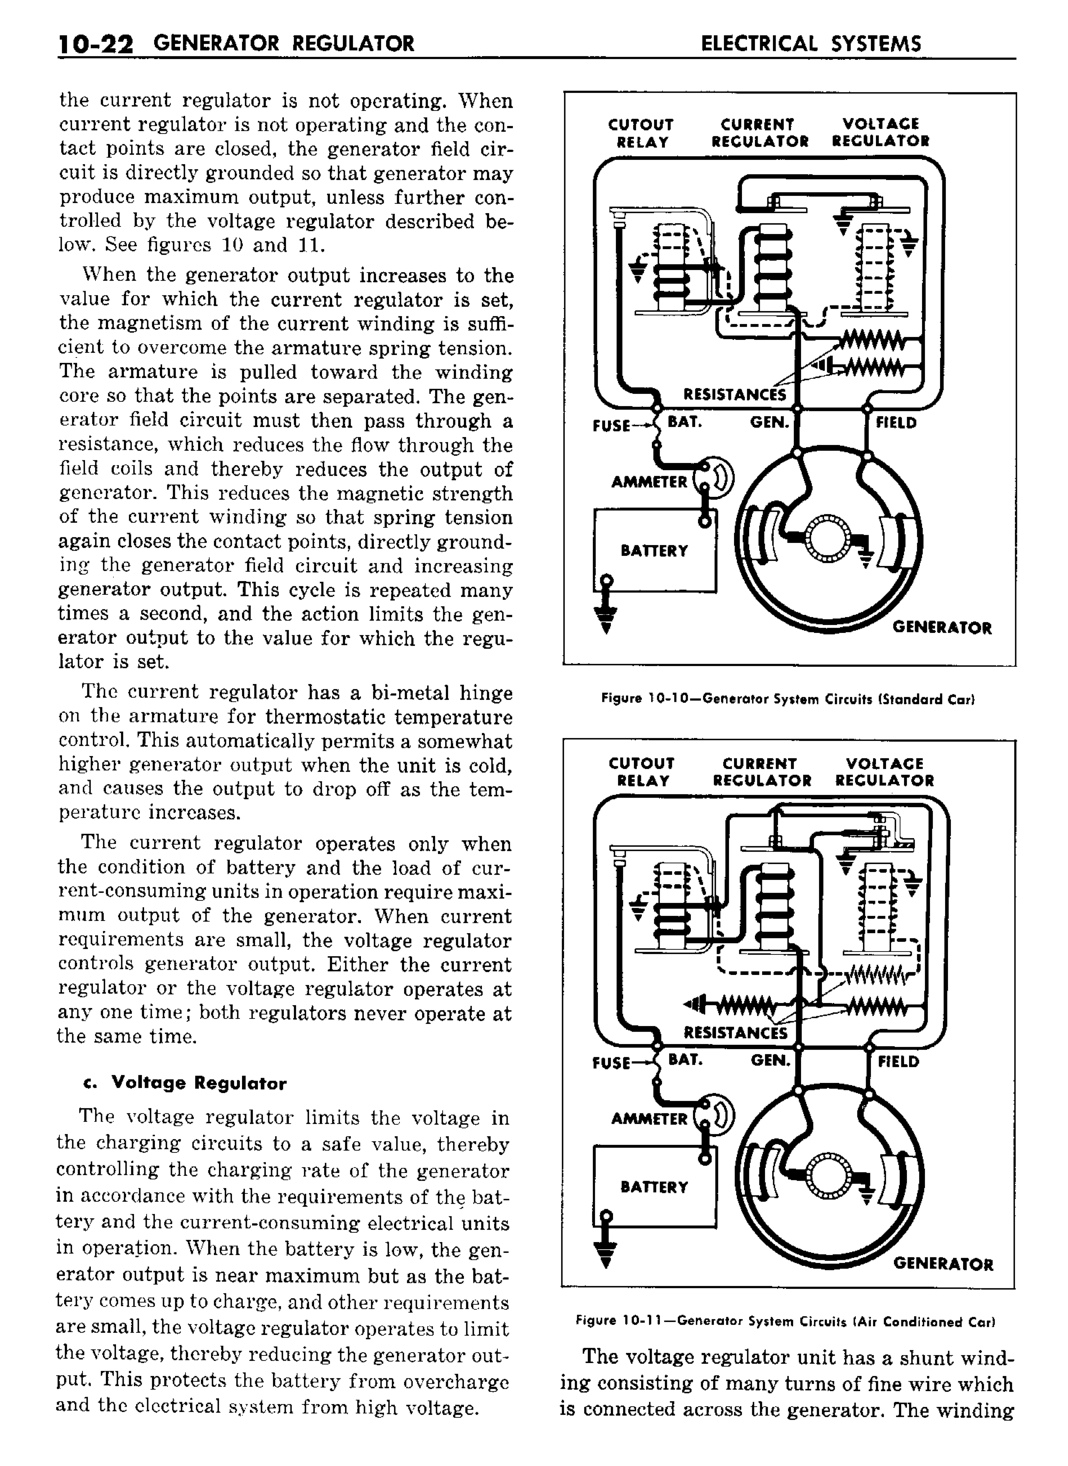 n_11 1960 Buick Shop Manual - Electrical Systems-022-022.jpg